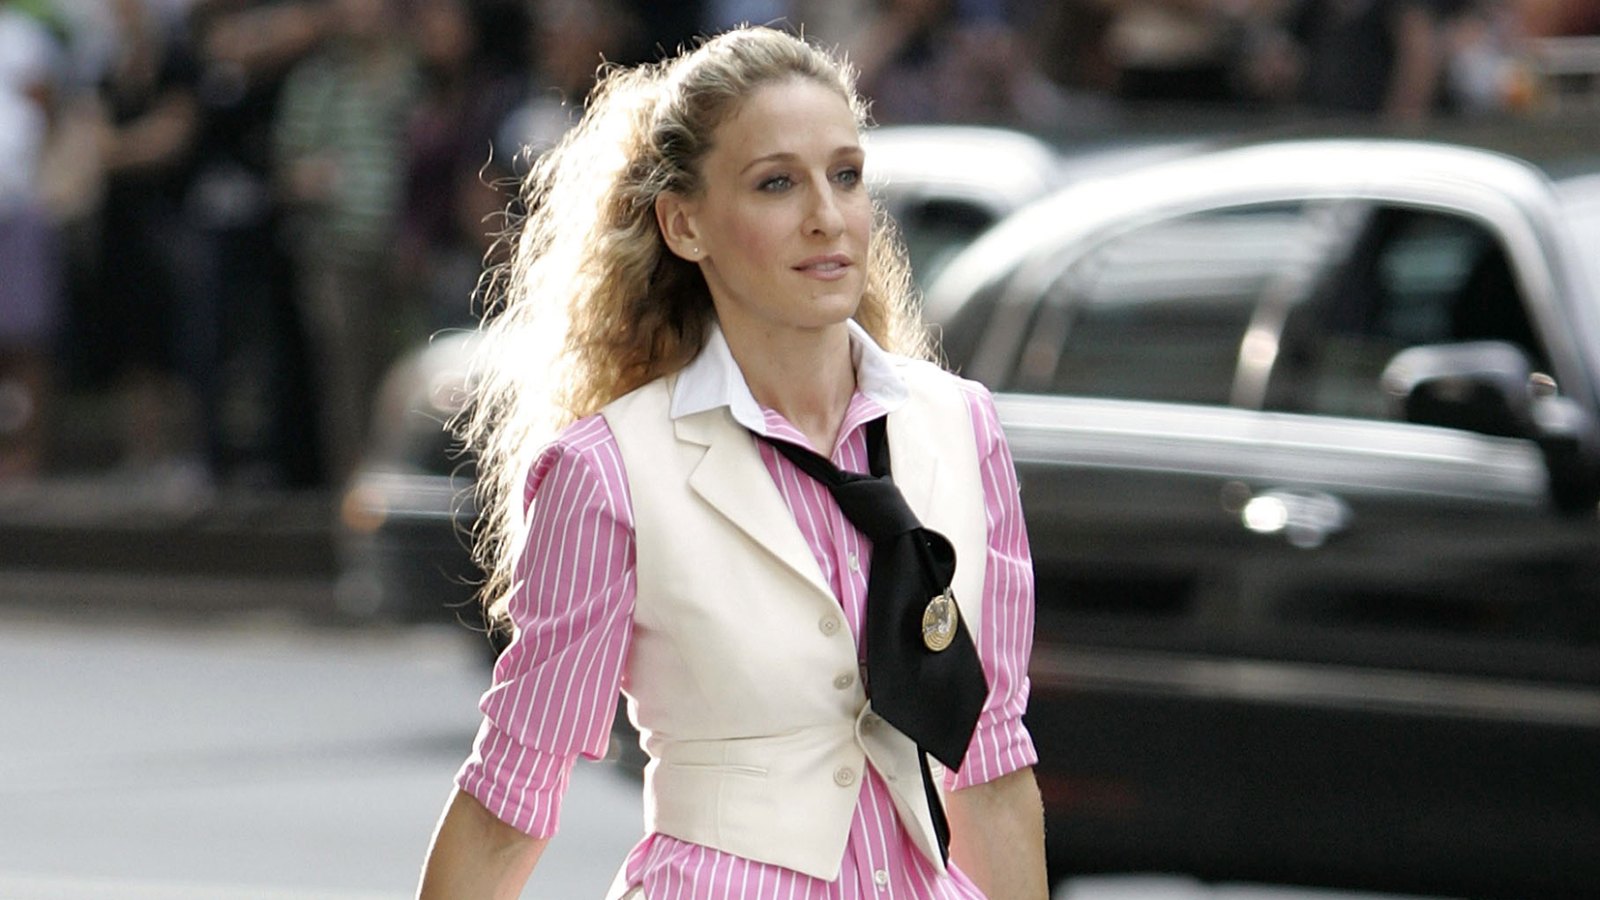 NEW YORK - SEPTEMBER 21: Actress Sarah Jessica Parker as "Carrie Bradshaw" on location for "Sex and the City: The Movie" on September 21, 2007, in New York City. (Photo by Brian Ach/WireImage)